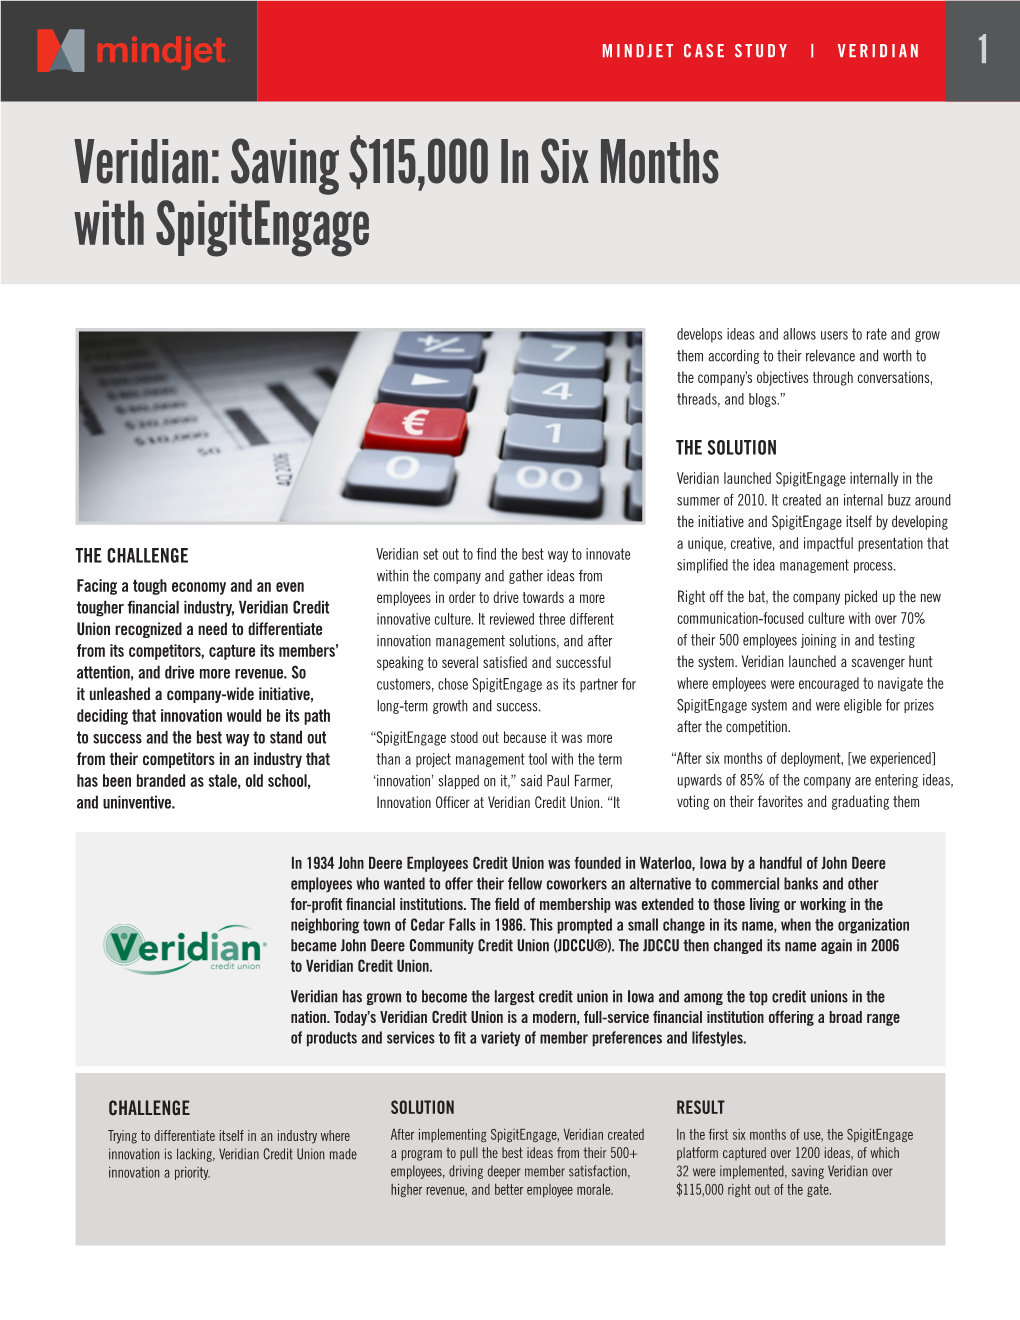 Veridian: Saving $115,000 in Six Months with Spigitengage